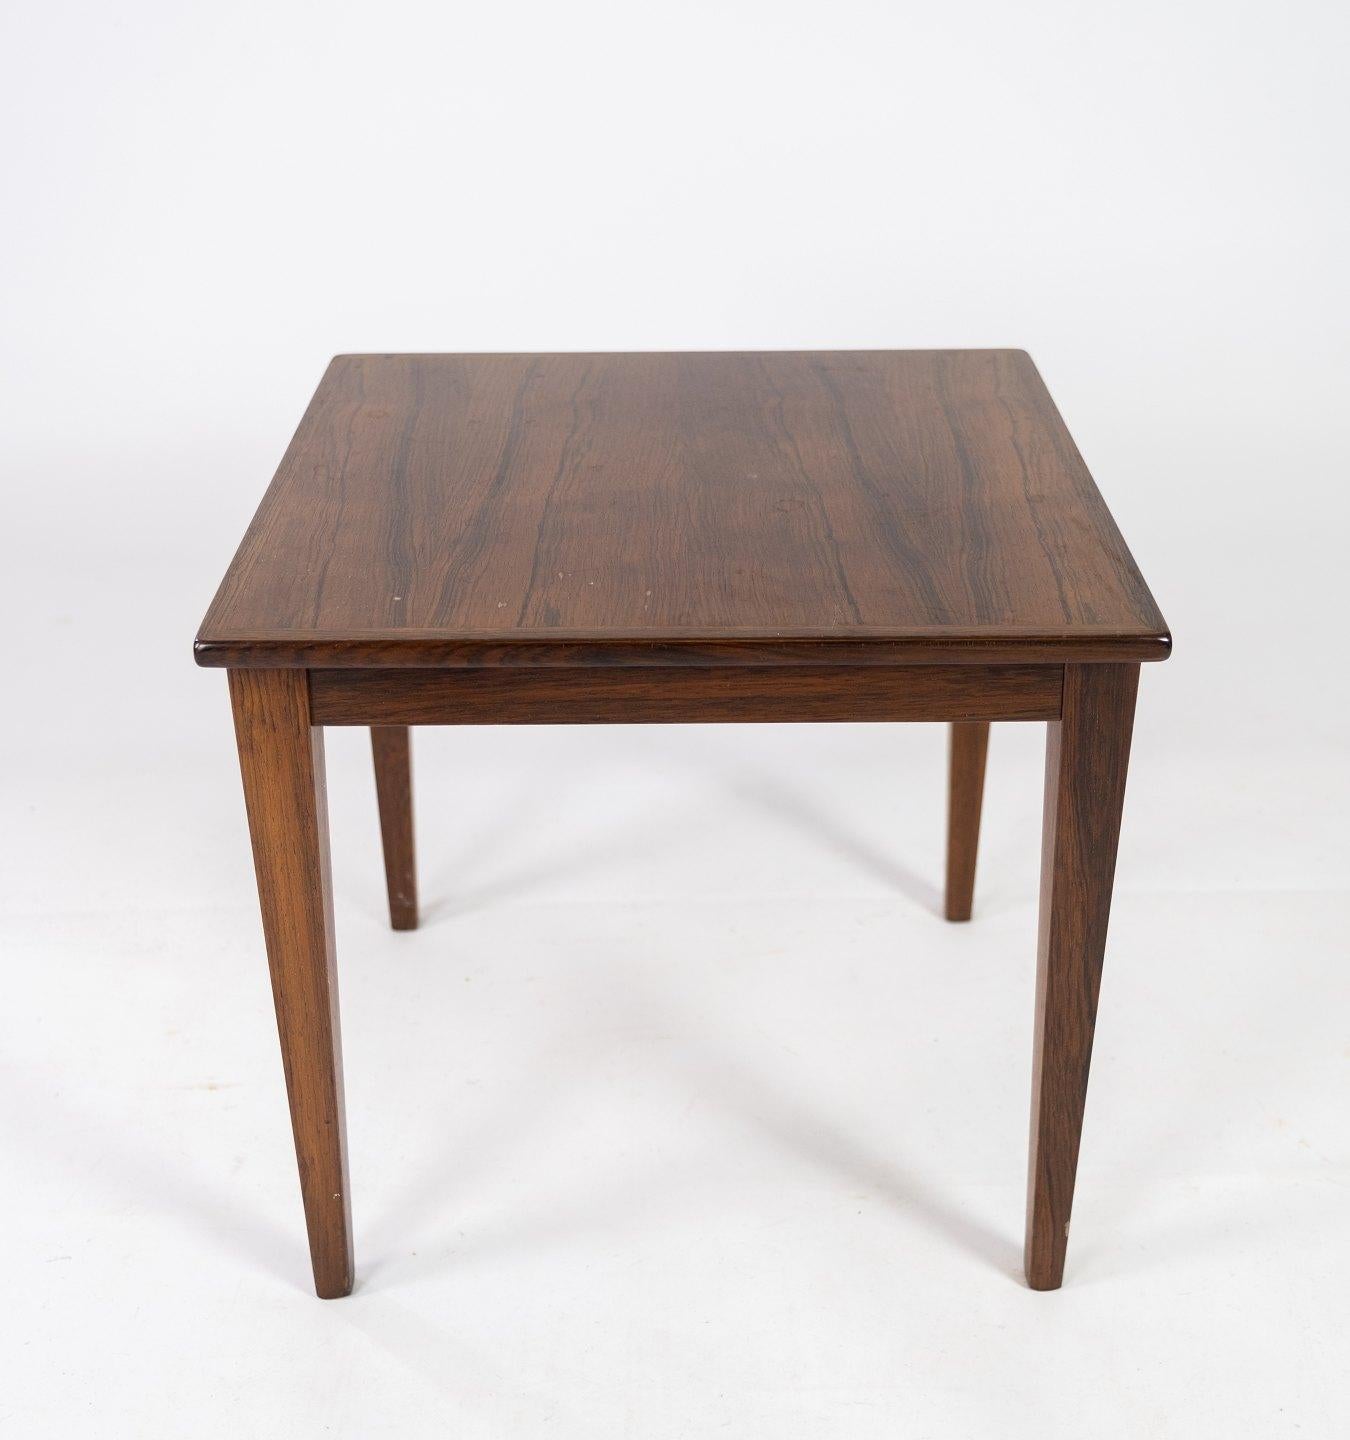 Scandinavian Modern Side Table Made In Rosewood, Danish Design From 1960s For Sale